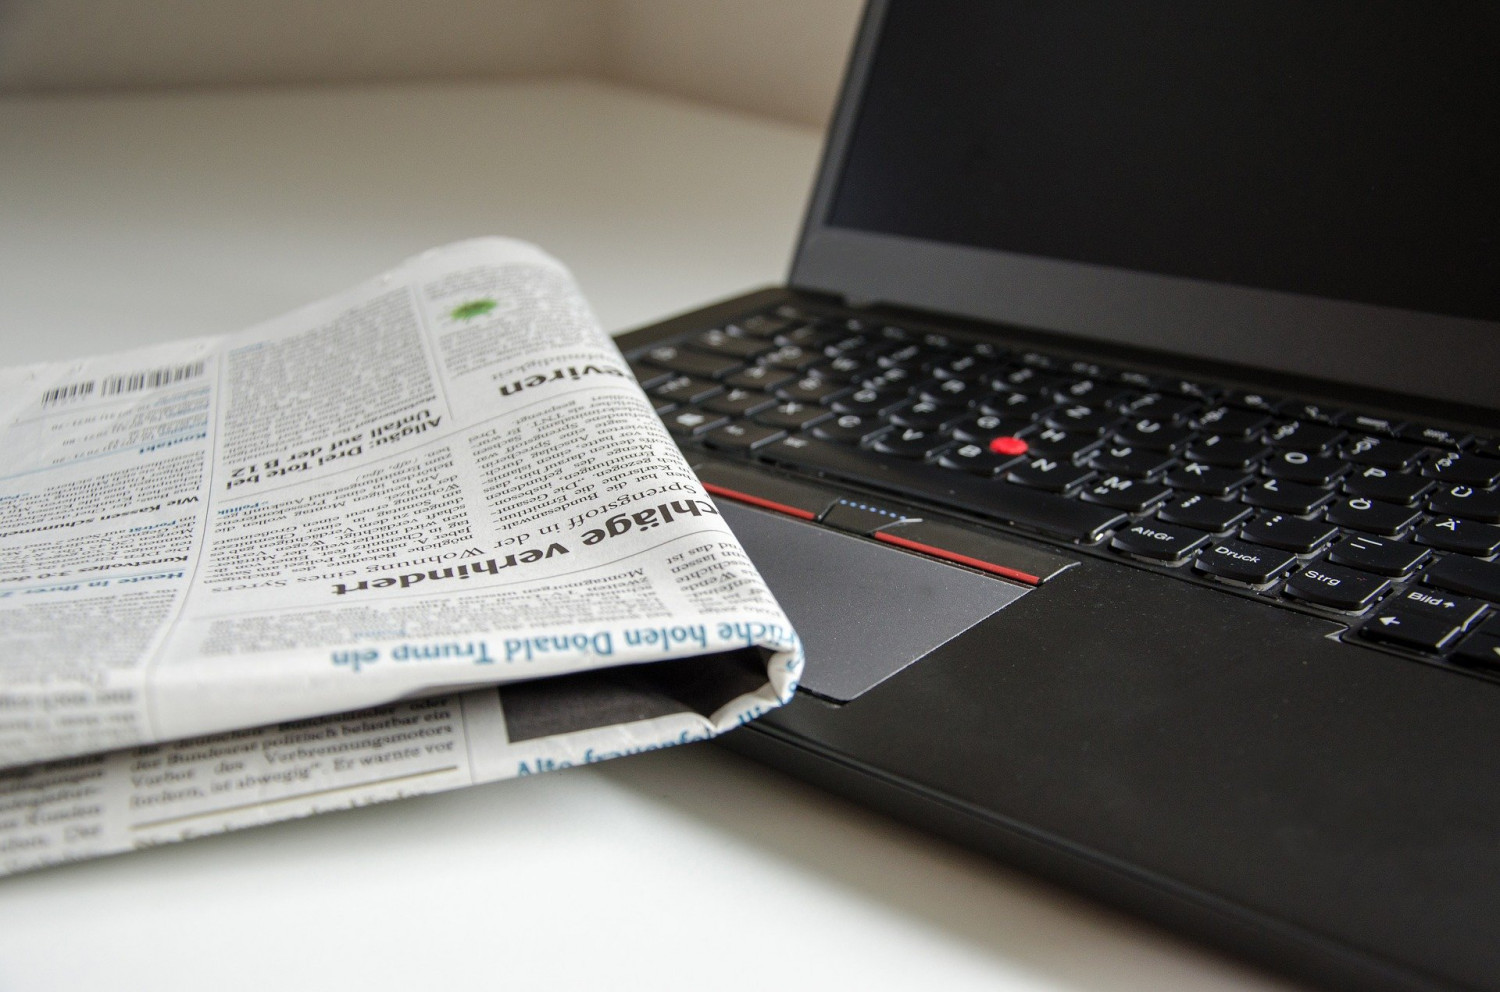 A folded up newspaper on top of a laptop